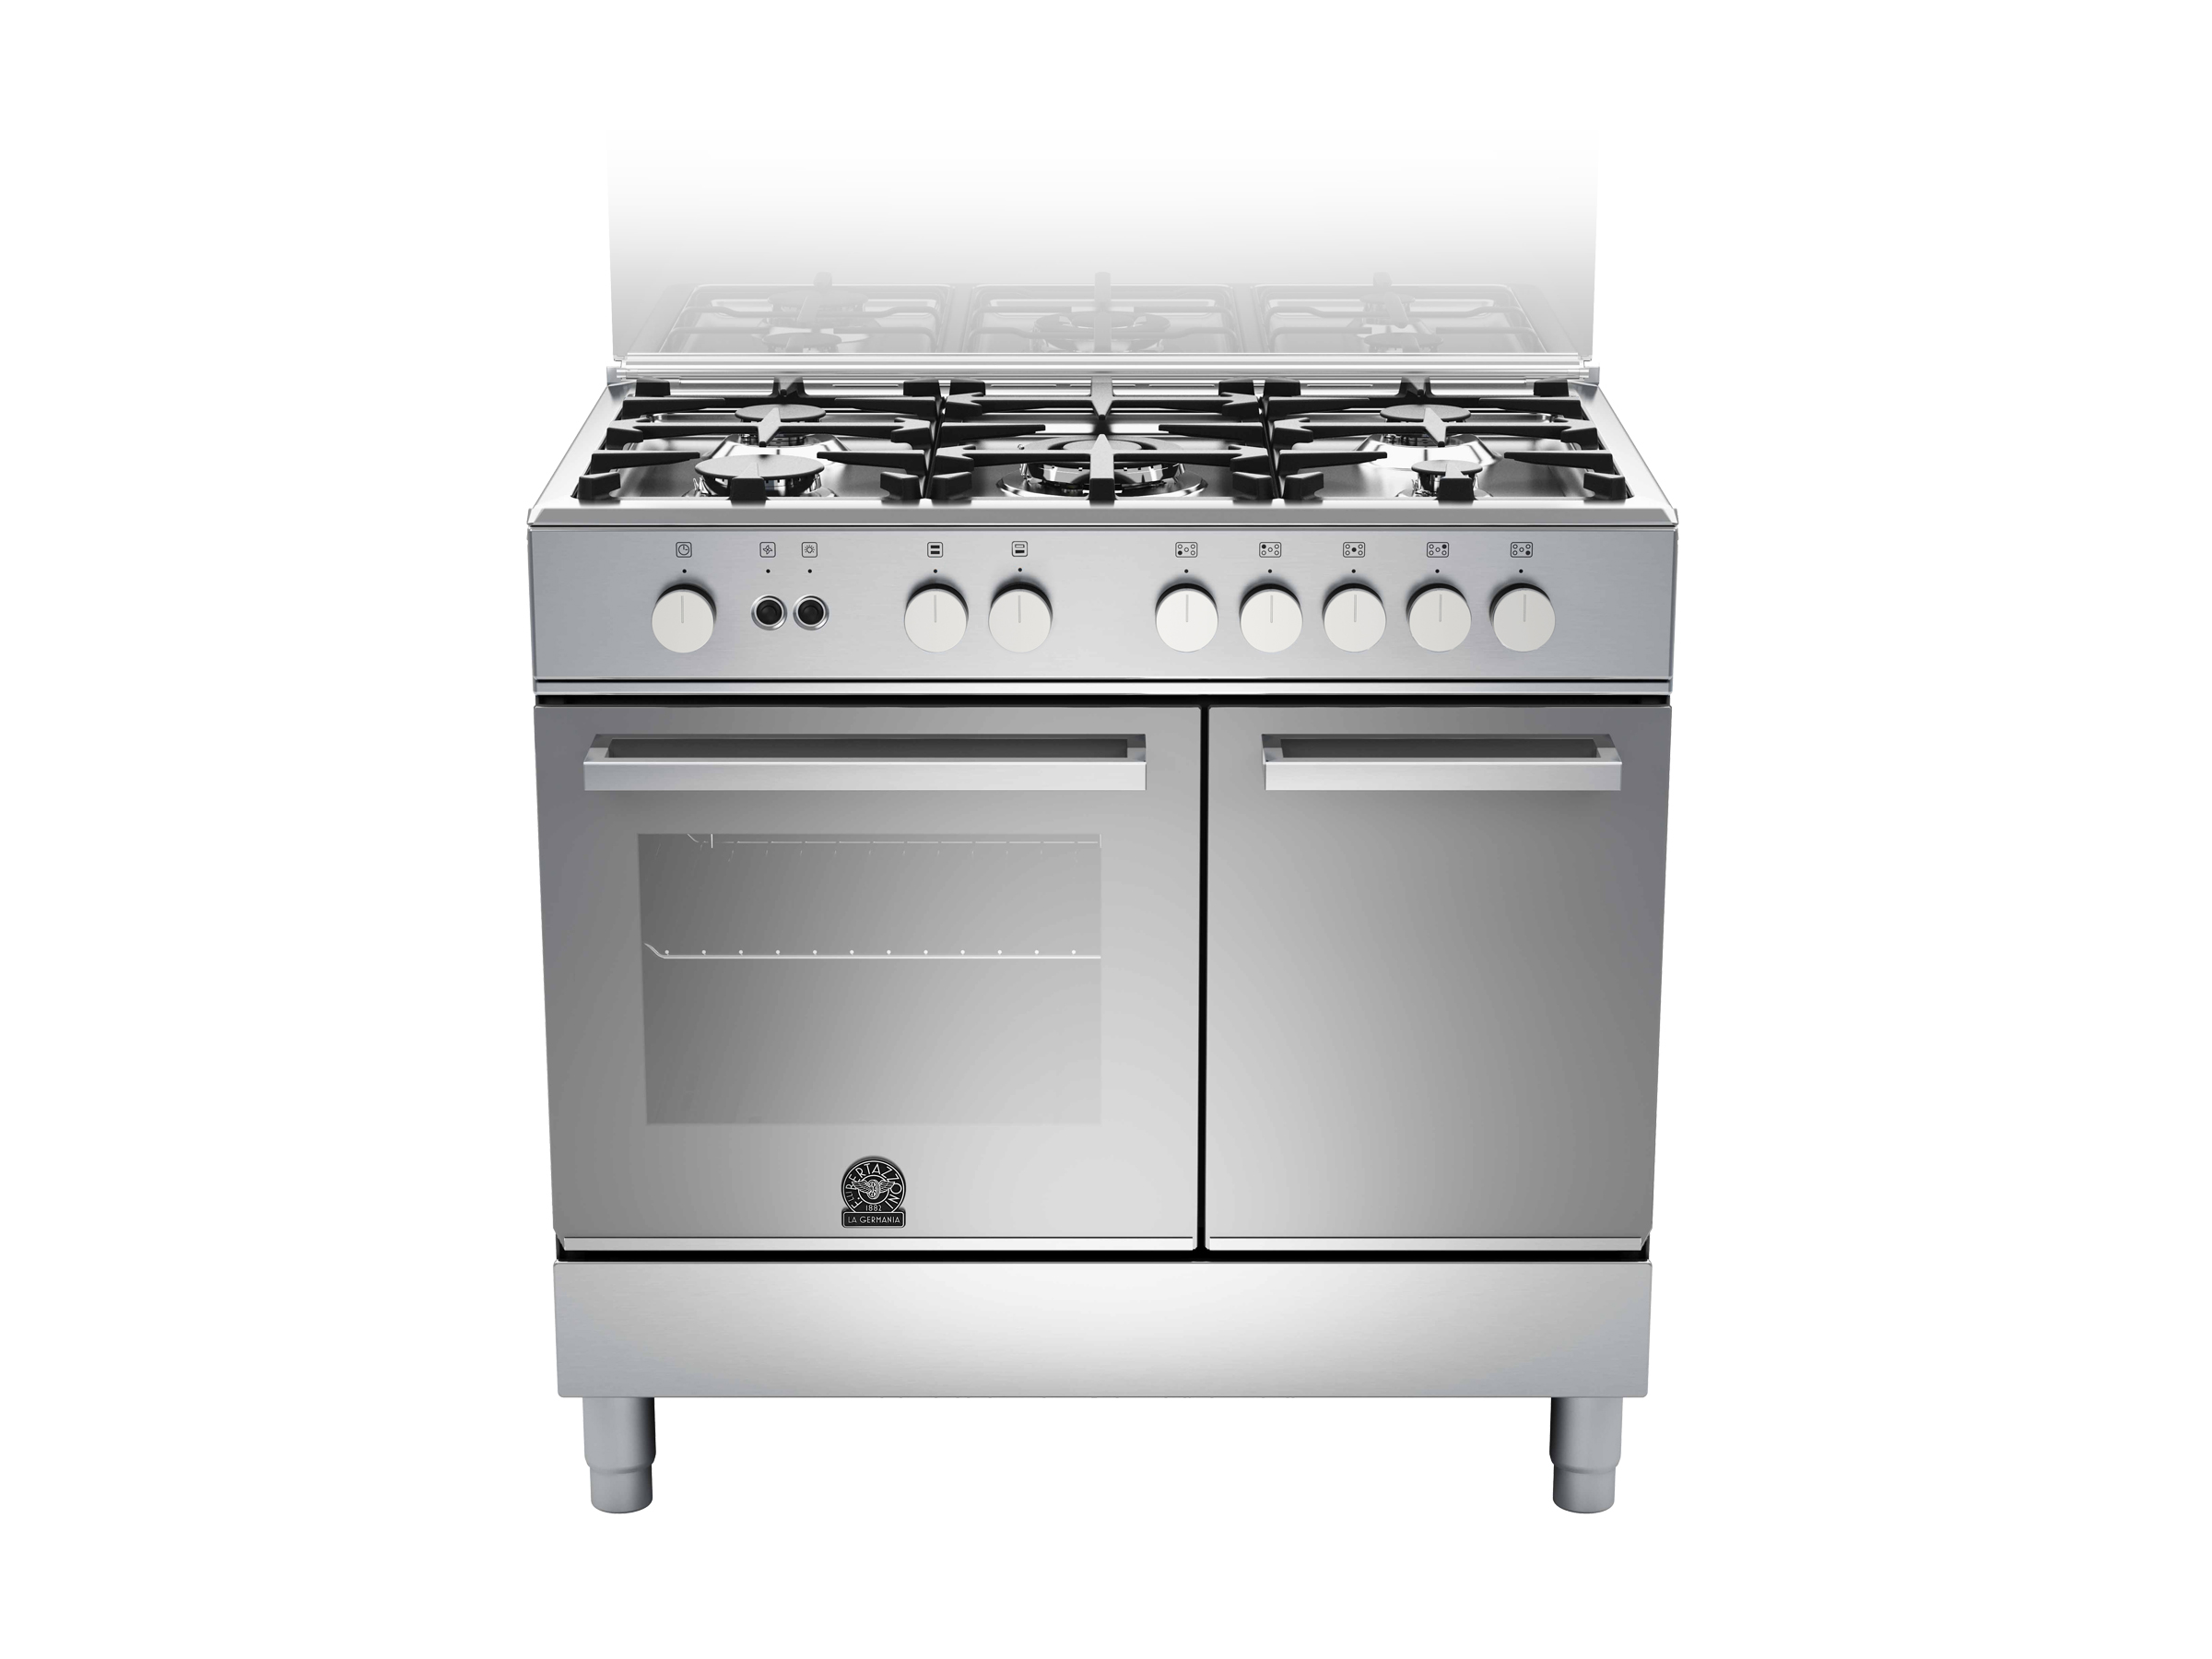 90-5 burners, Gas Oven Gas Grill, Storage Comp. | Bertazzoni La Germania - Stainless